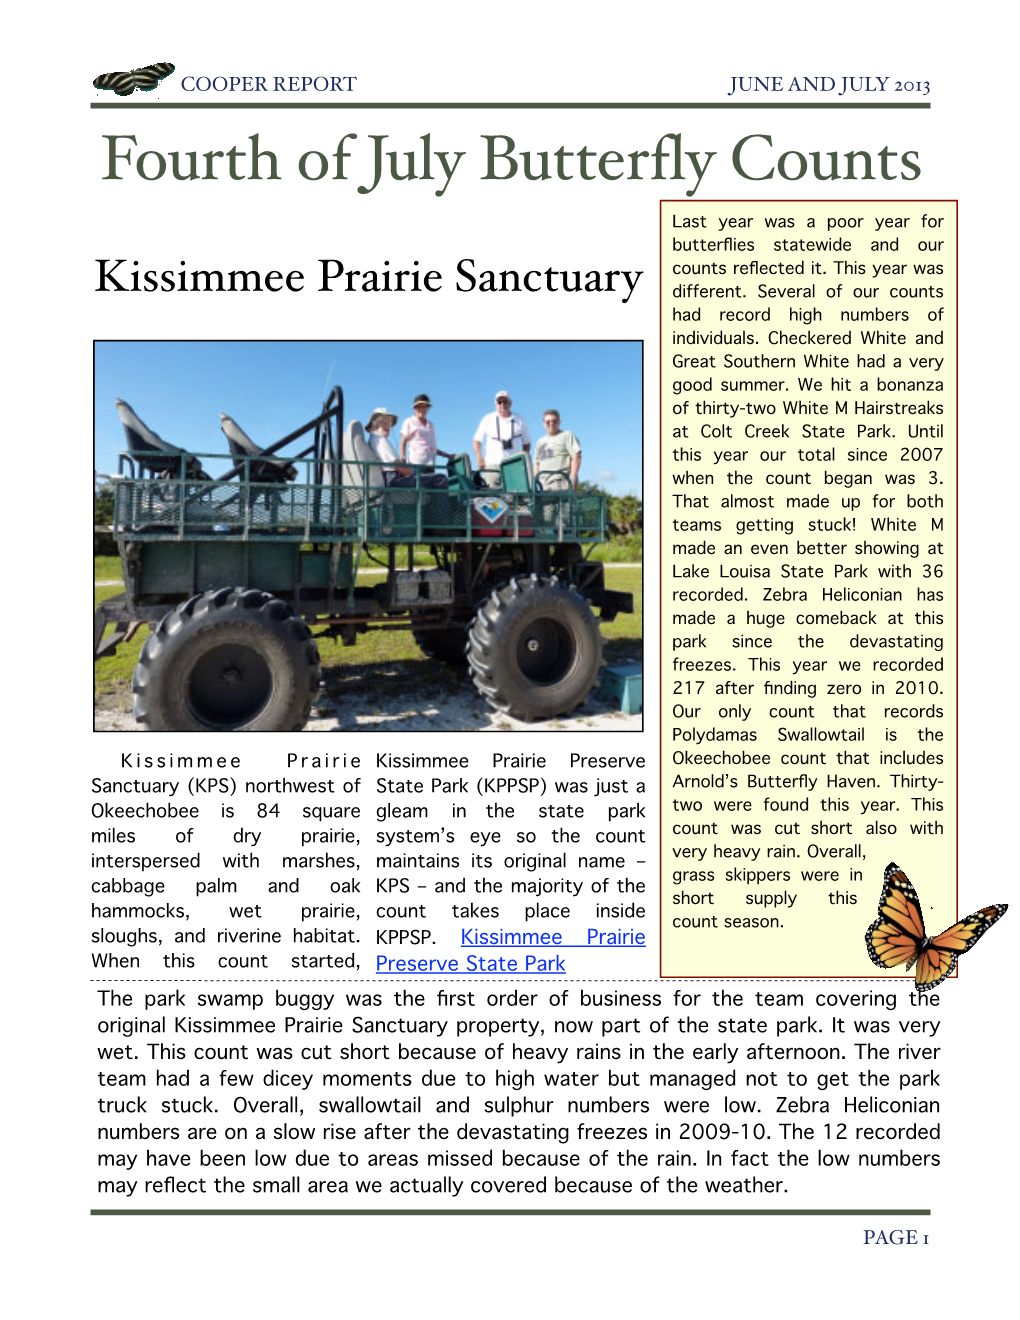 Fourth of July Butterfly Counts June